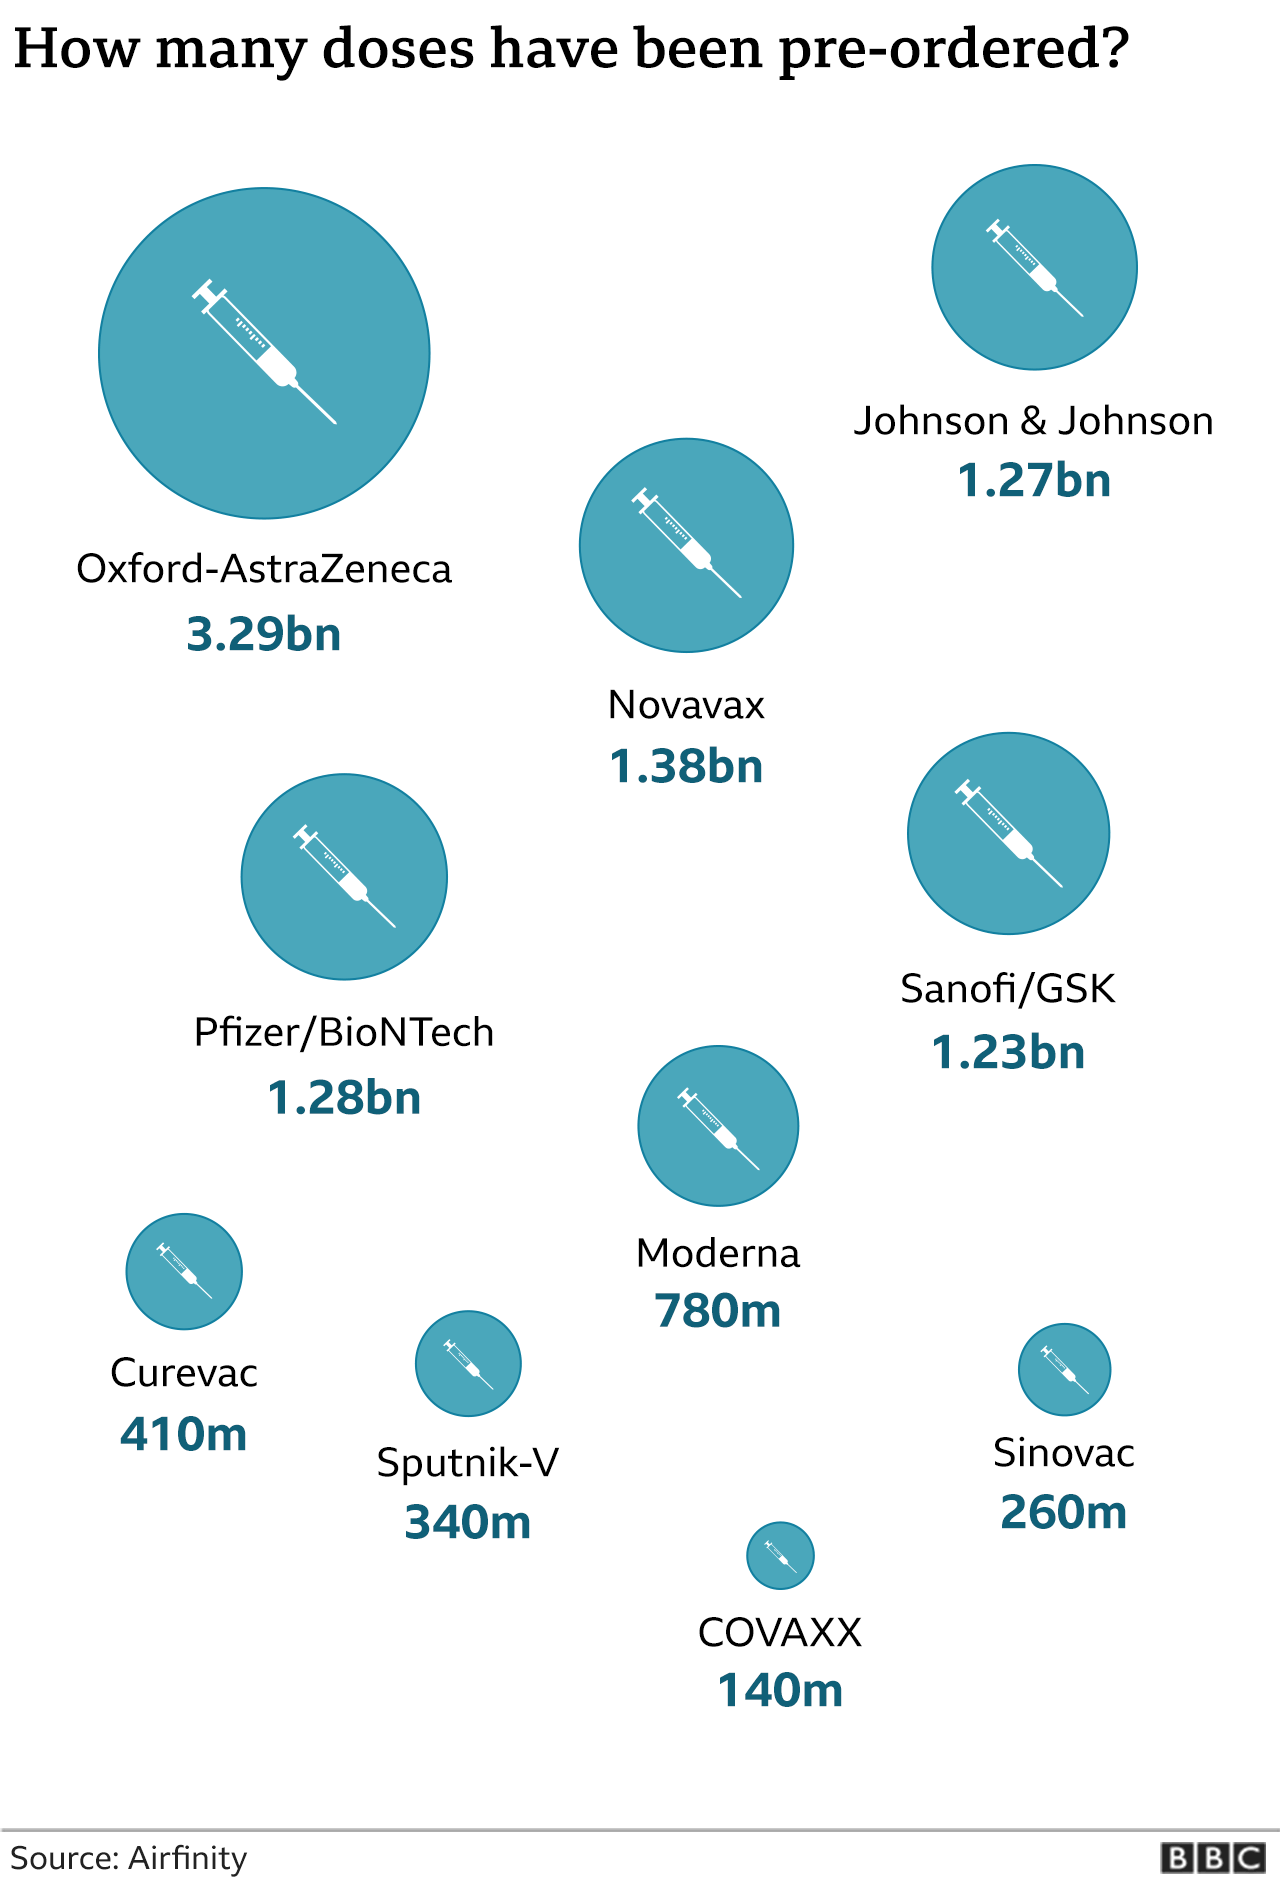 Graphic showing the pre-ordered doses for each vaccine maker